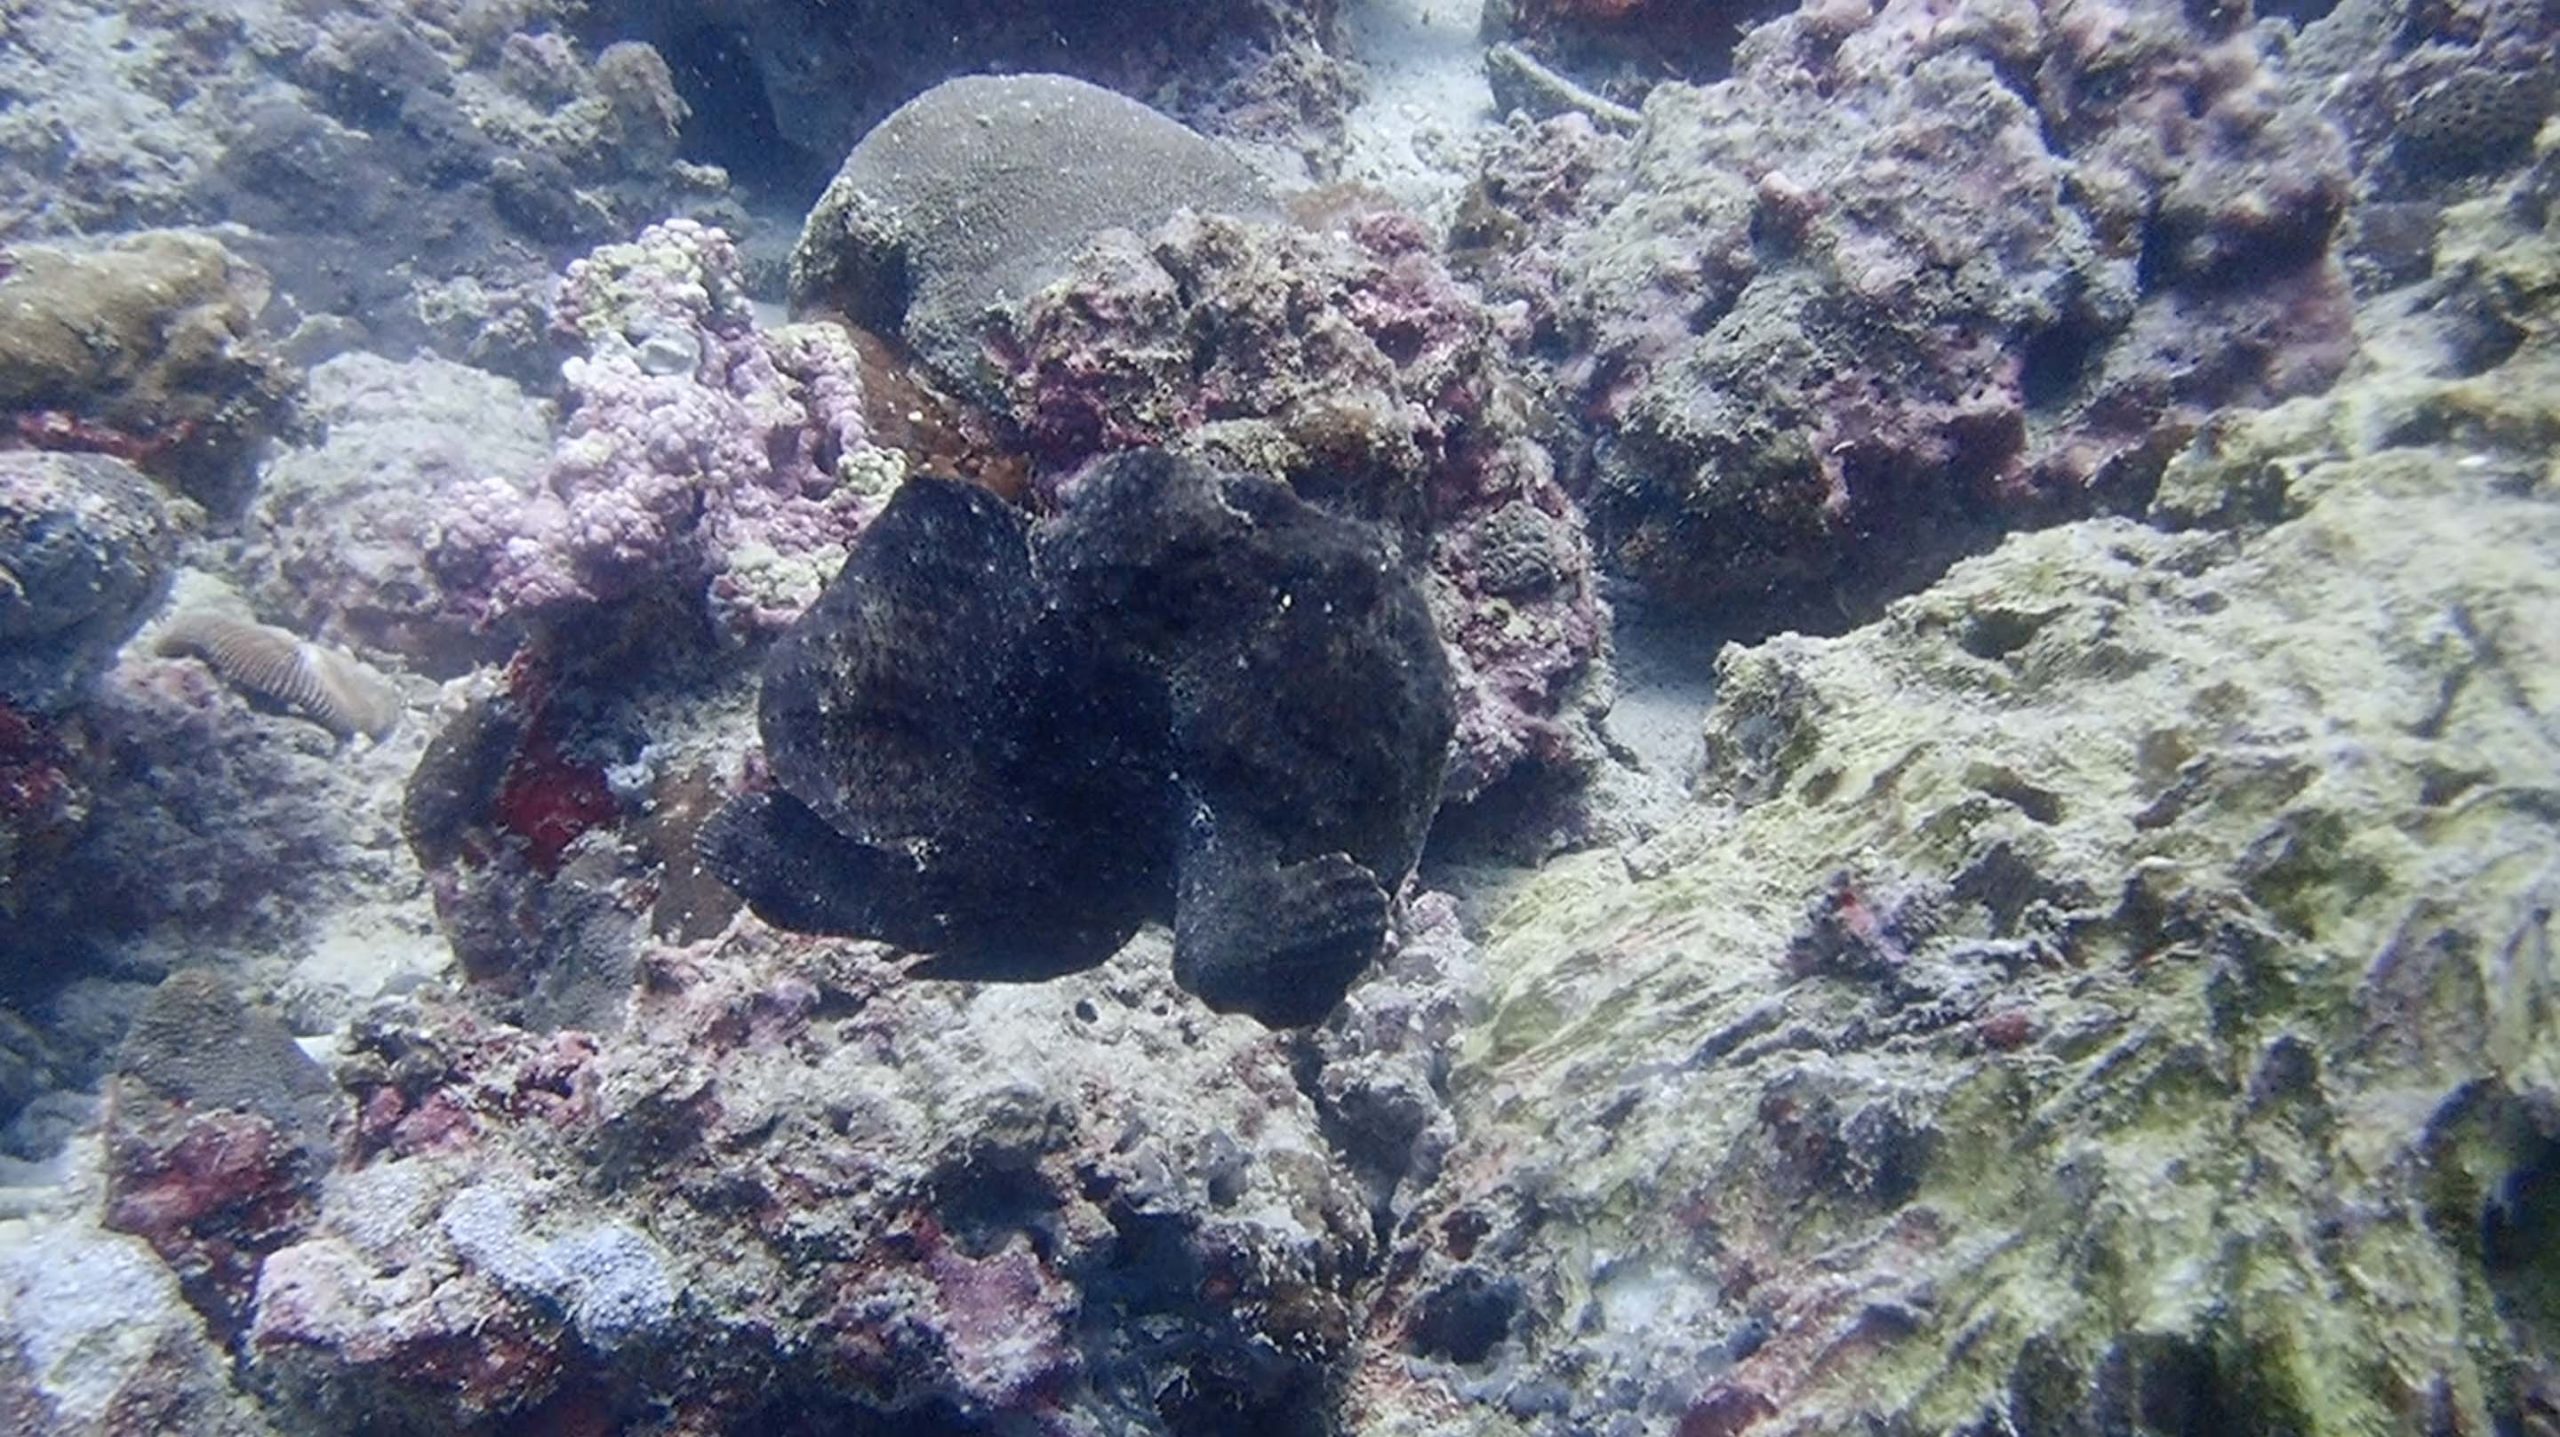 Commerson's frogfish - Moalboal Reef Species